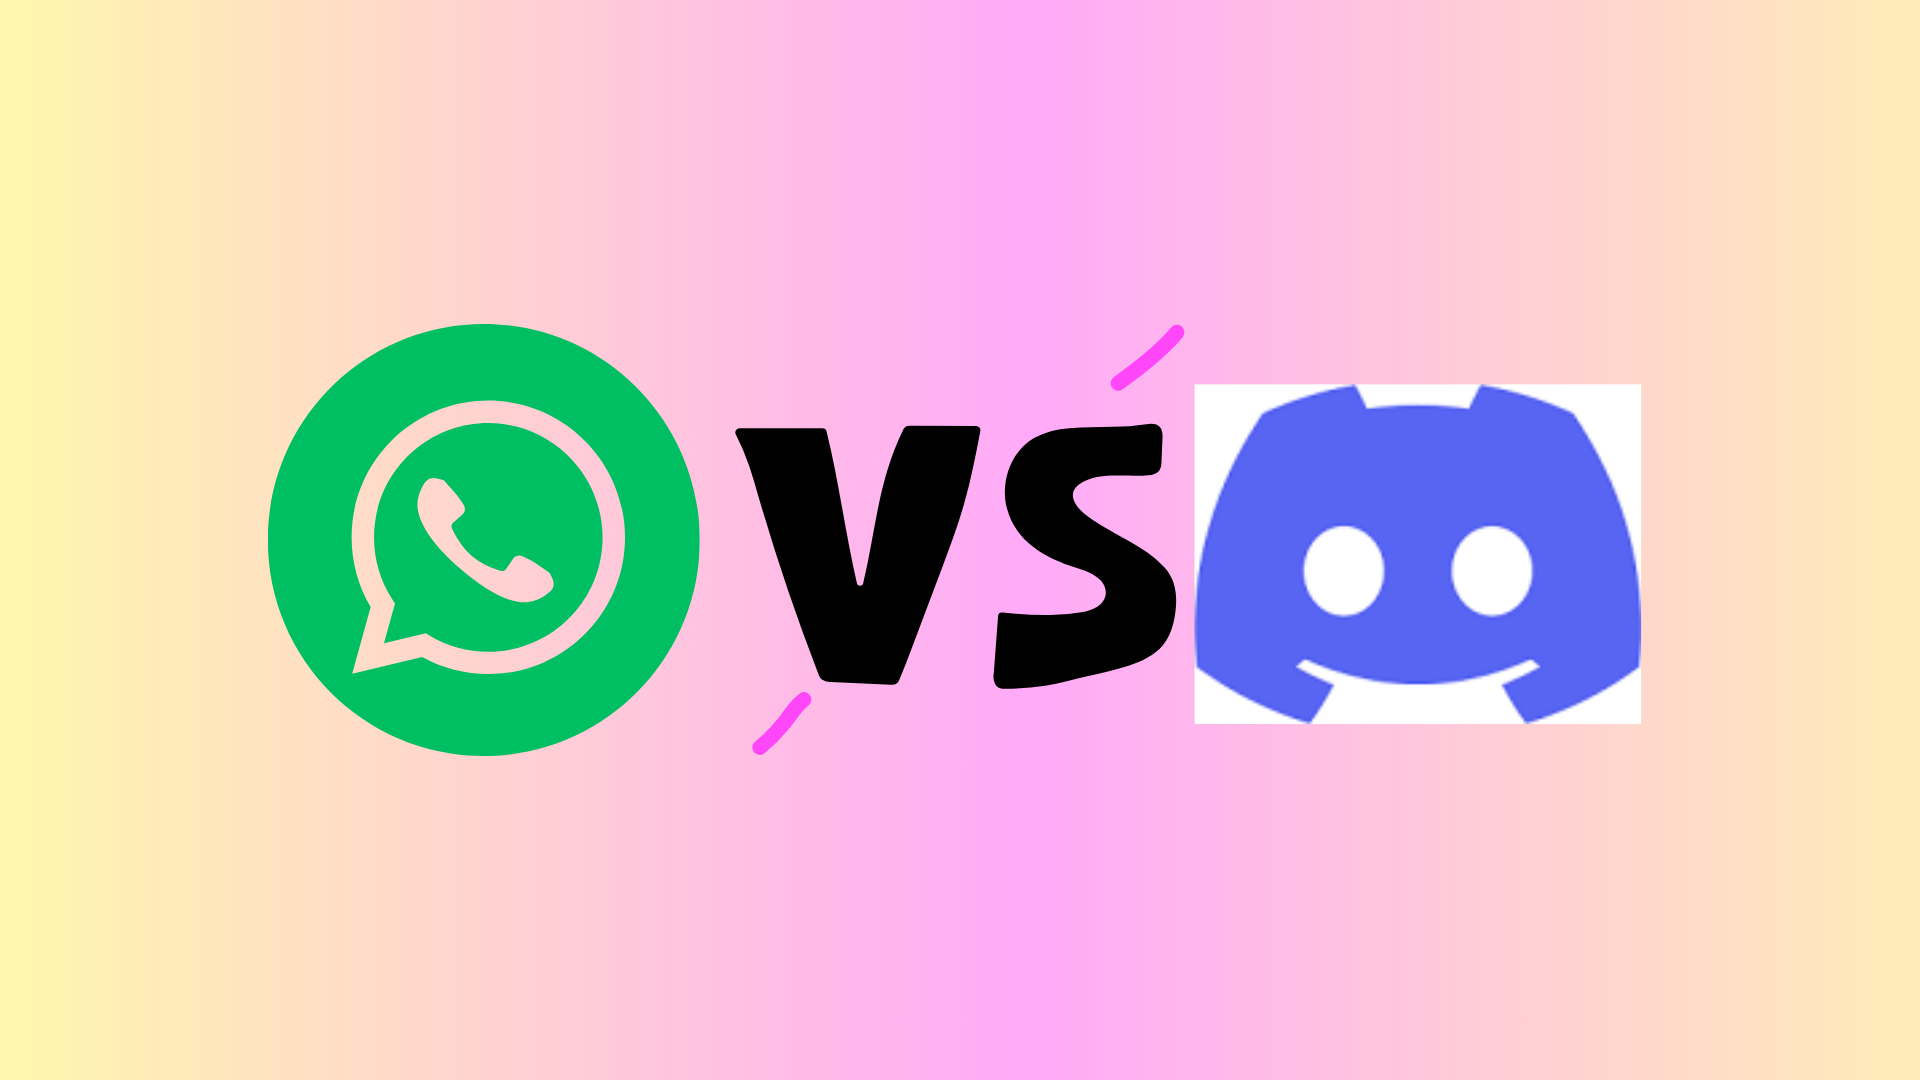 WhatsApp launches a new Discord-like voice chat feature for large